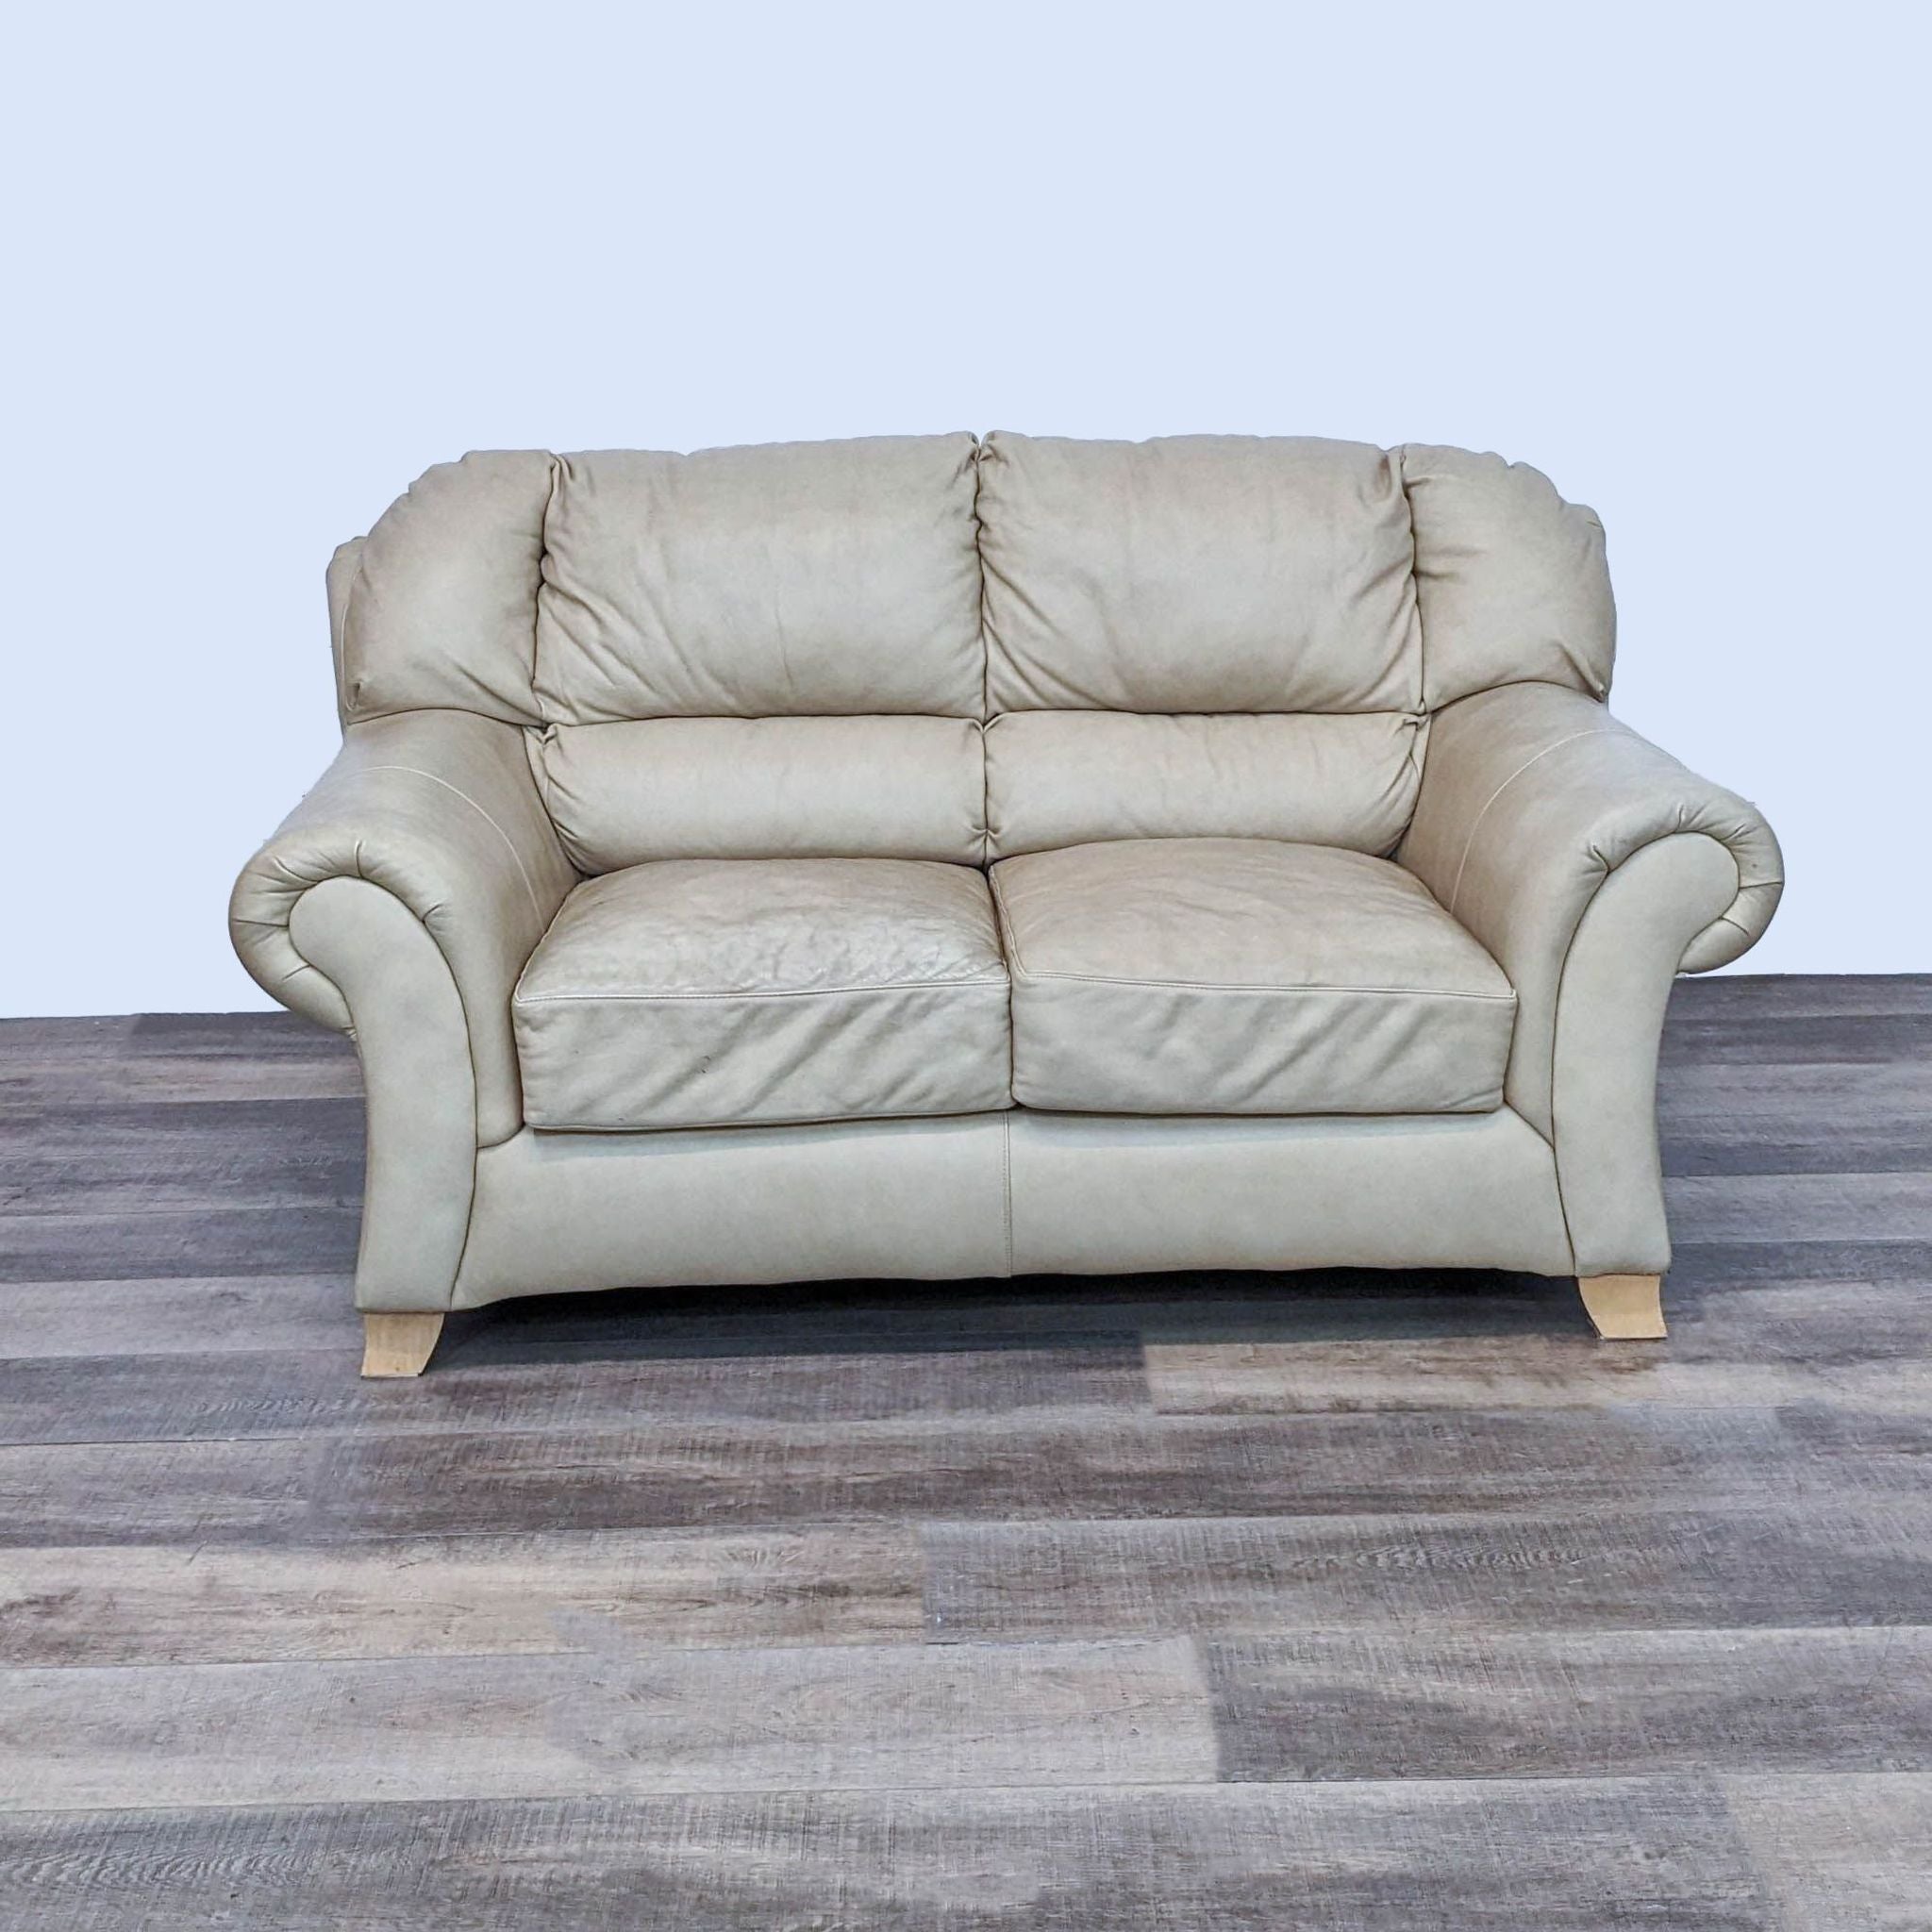 Reperch tan leather loveseat with lumbar support, high back cushion, curved arms, and light finish feet, viewed from the front.